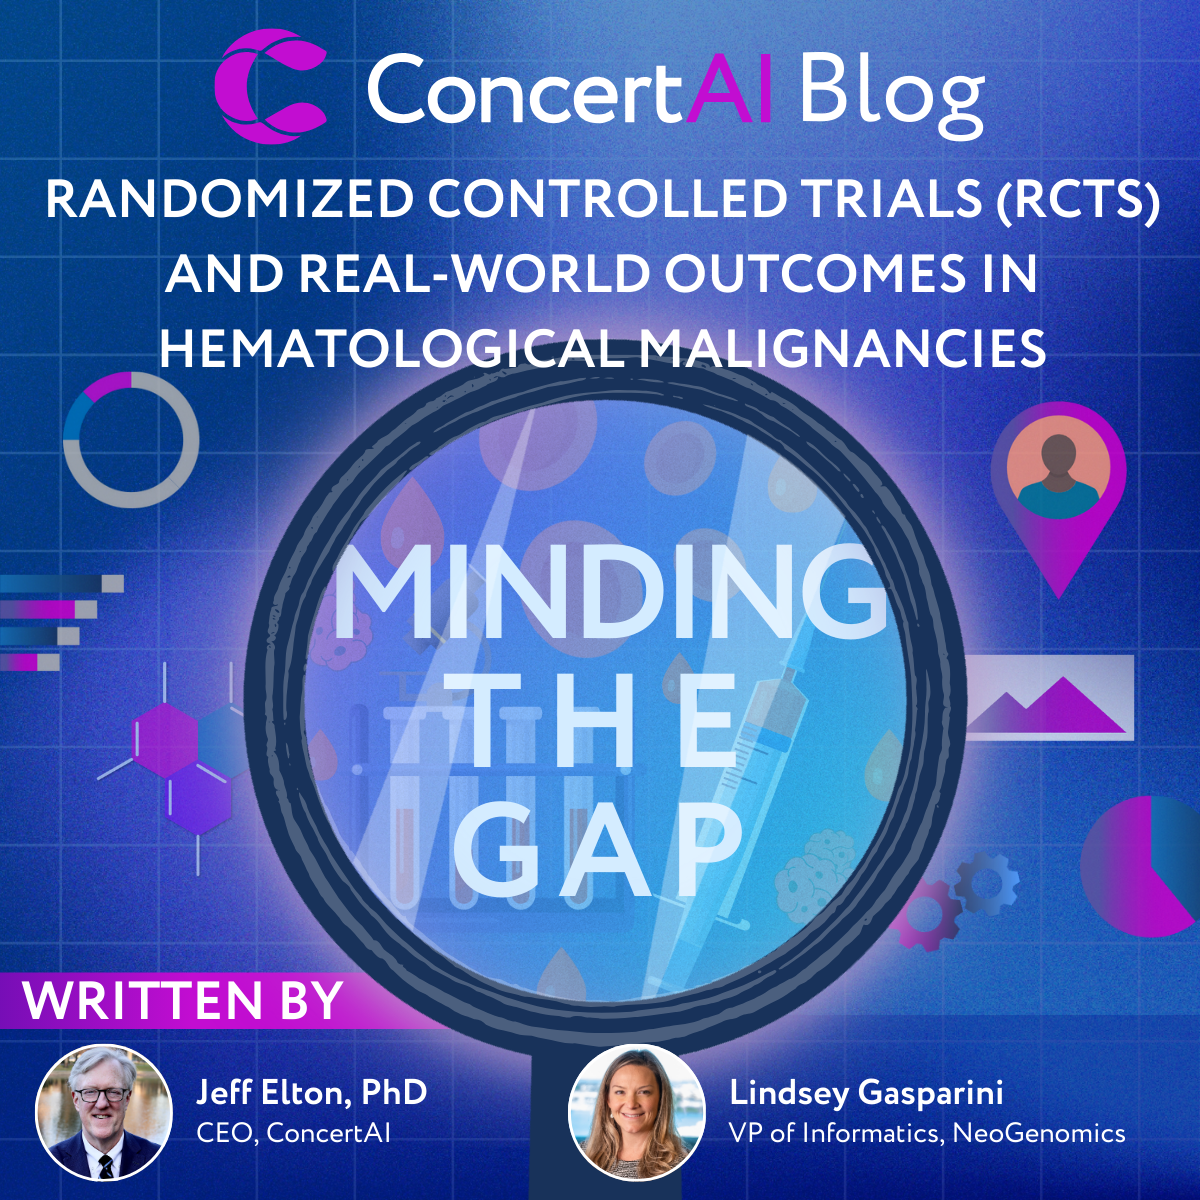 Randomized Controlled Trials (RCTs) and Real-world Outcomes in Hematological Malignancies: Minding the Gap